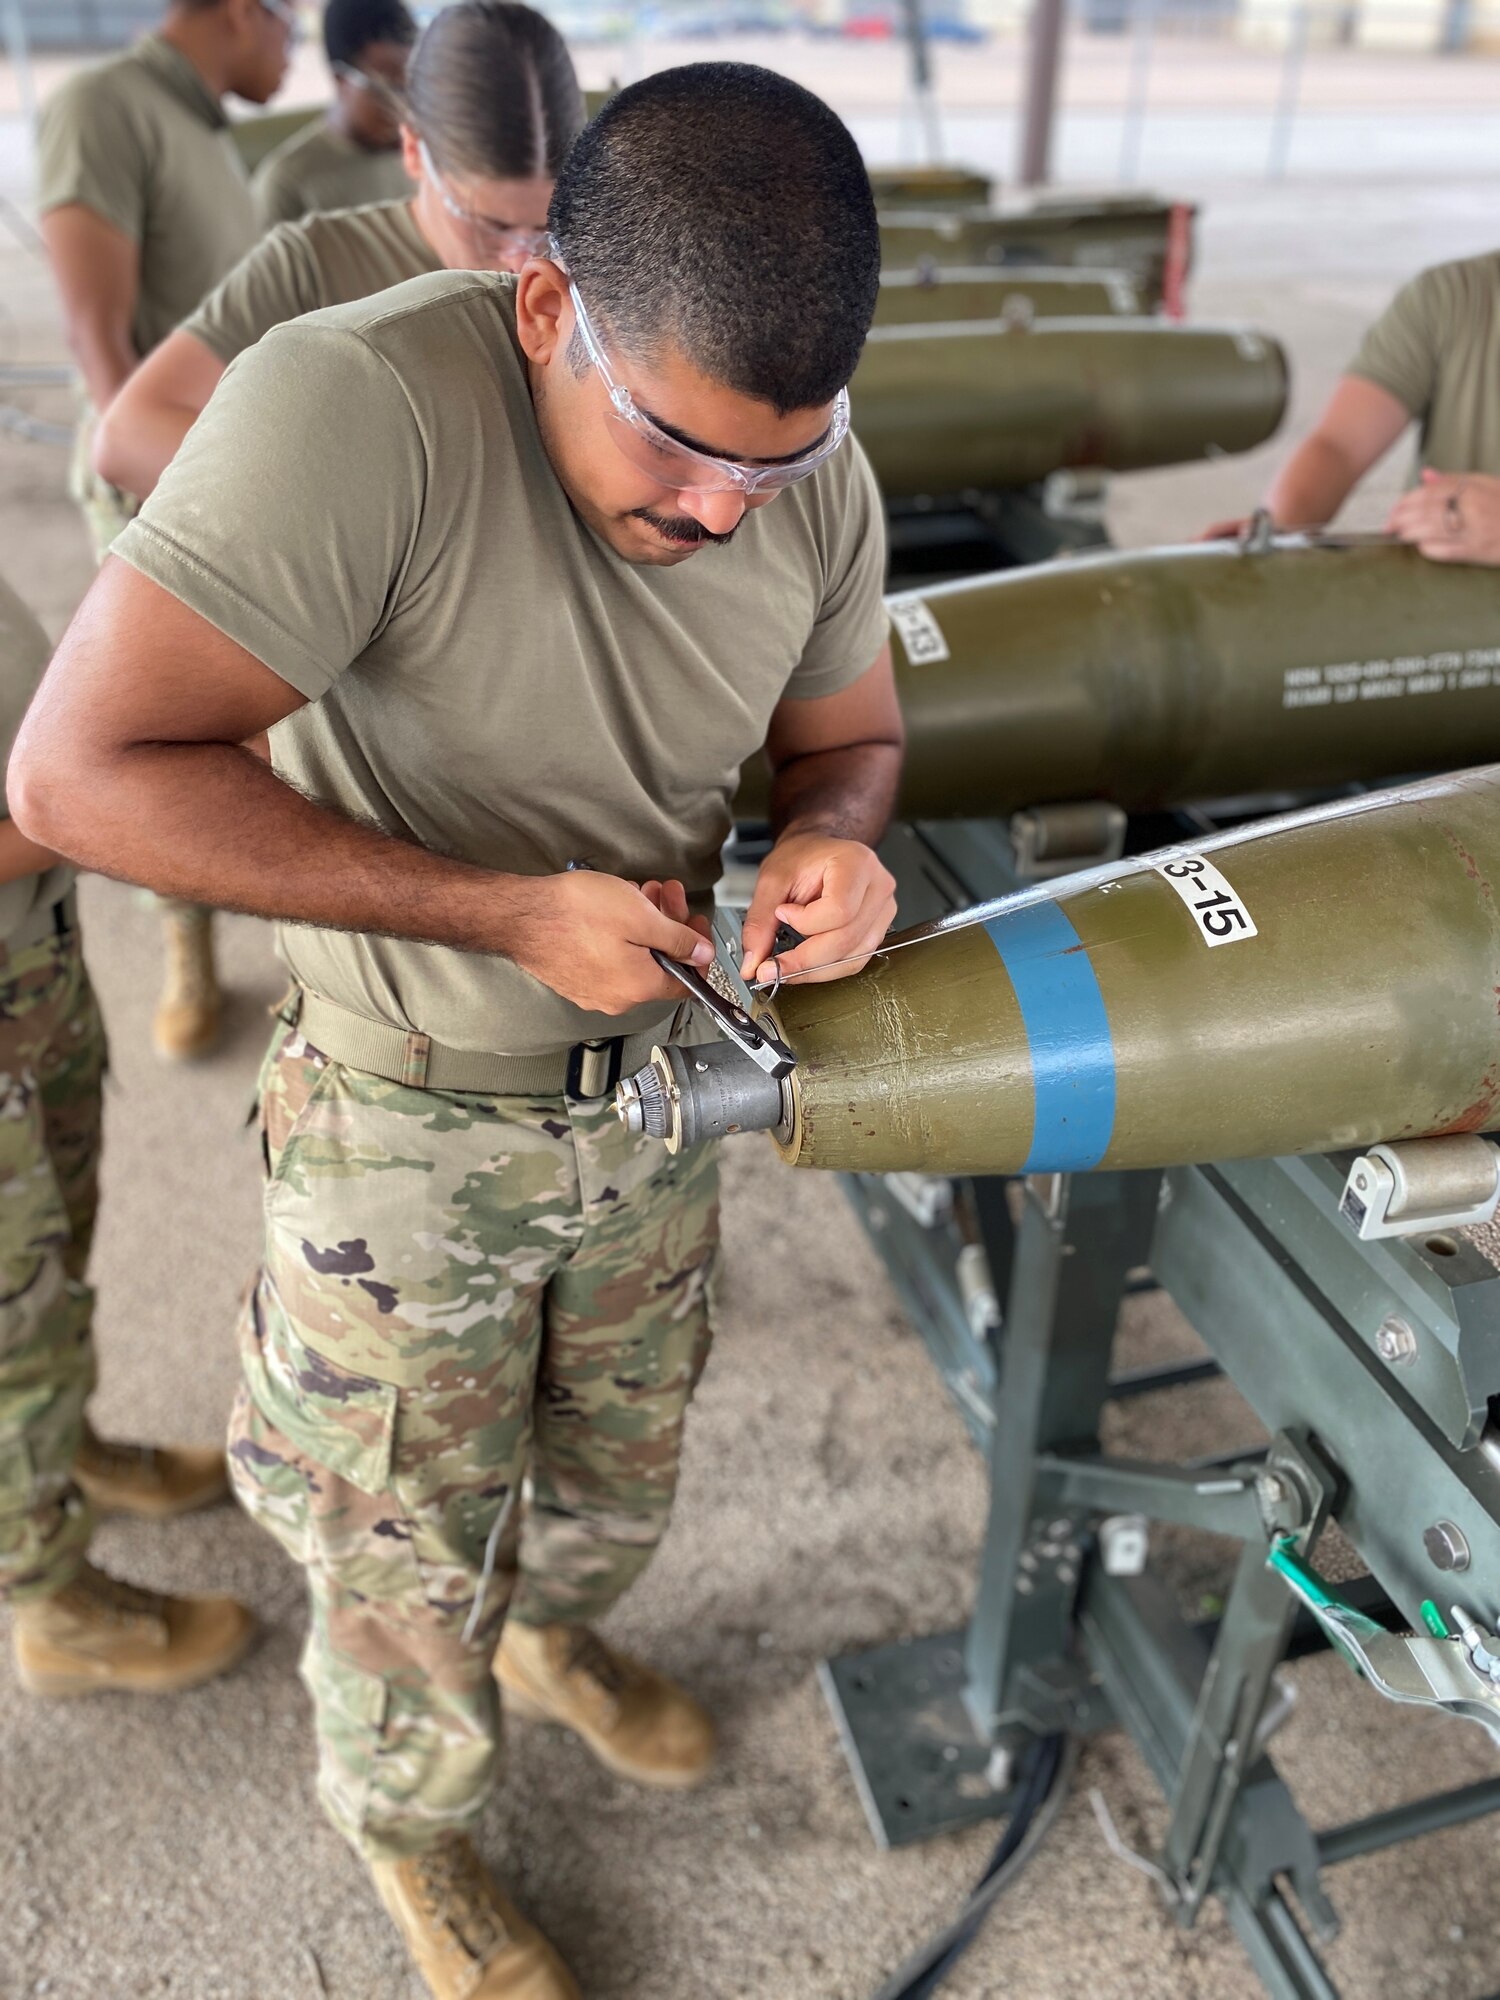 Airman 1st Class Jan Pabon, 363rd Training Squadron munitions system apprentice course student, assembles an MK82 training bomb at Sheppard Air Force Base, Texas, July 17, 2020. Pabon ACEd the munitions system apprentice course after scoring perfect scores on all seven of the course's block tests. (Courtesy Photo)